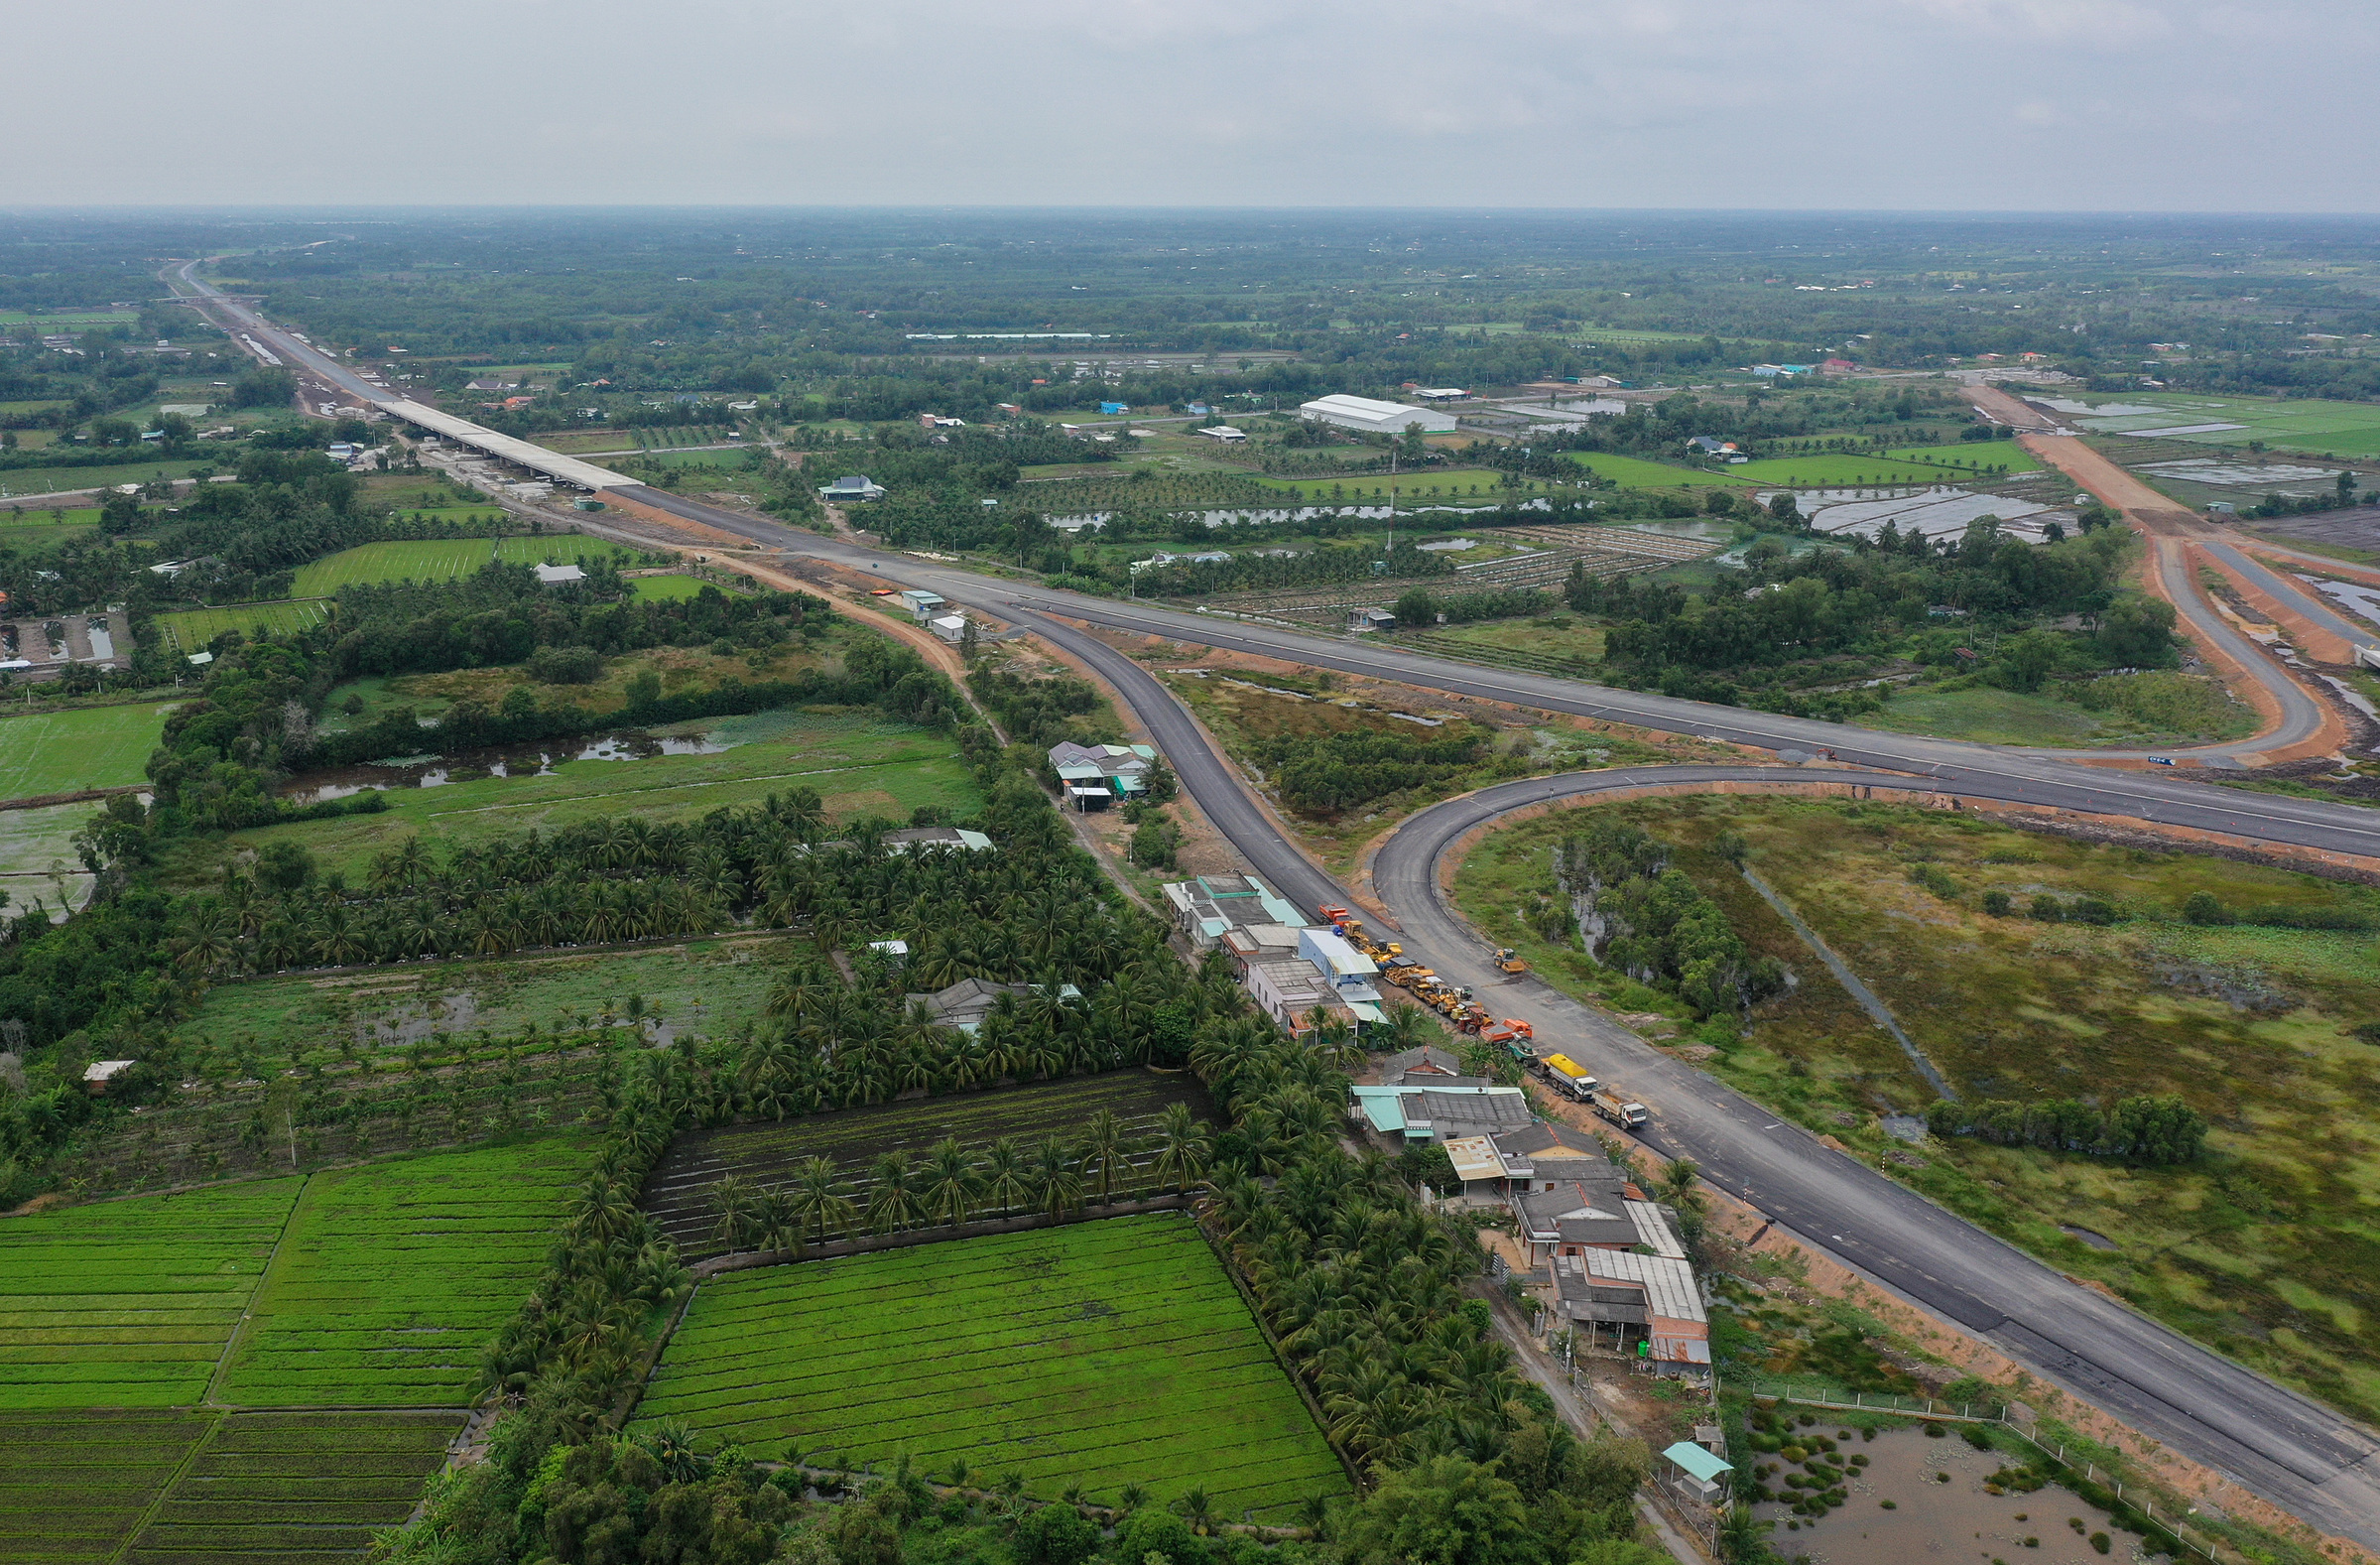 Trung Luong - My Thuan Expressway, the extension of the HCMC – Trung Luong route, is under construction in Tien Giang Province, January 2021. Photo by VnExpress/Quynh Tran